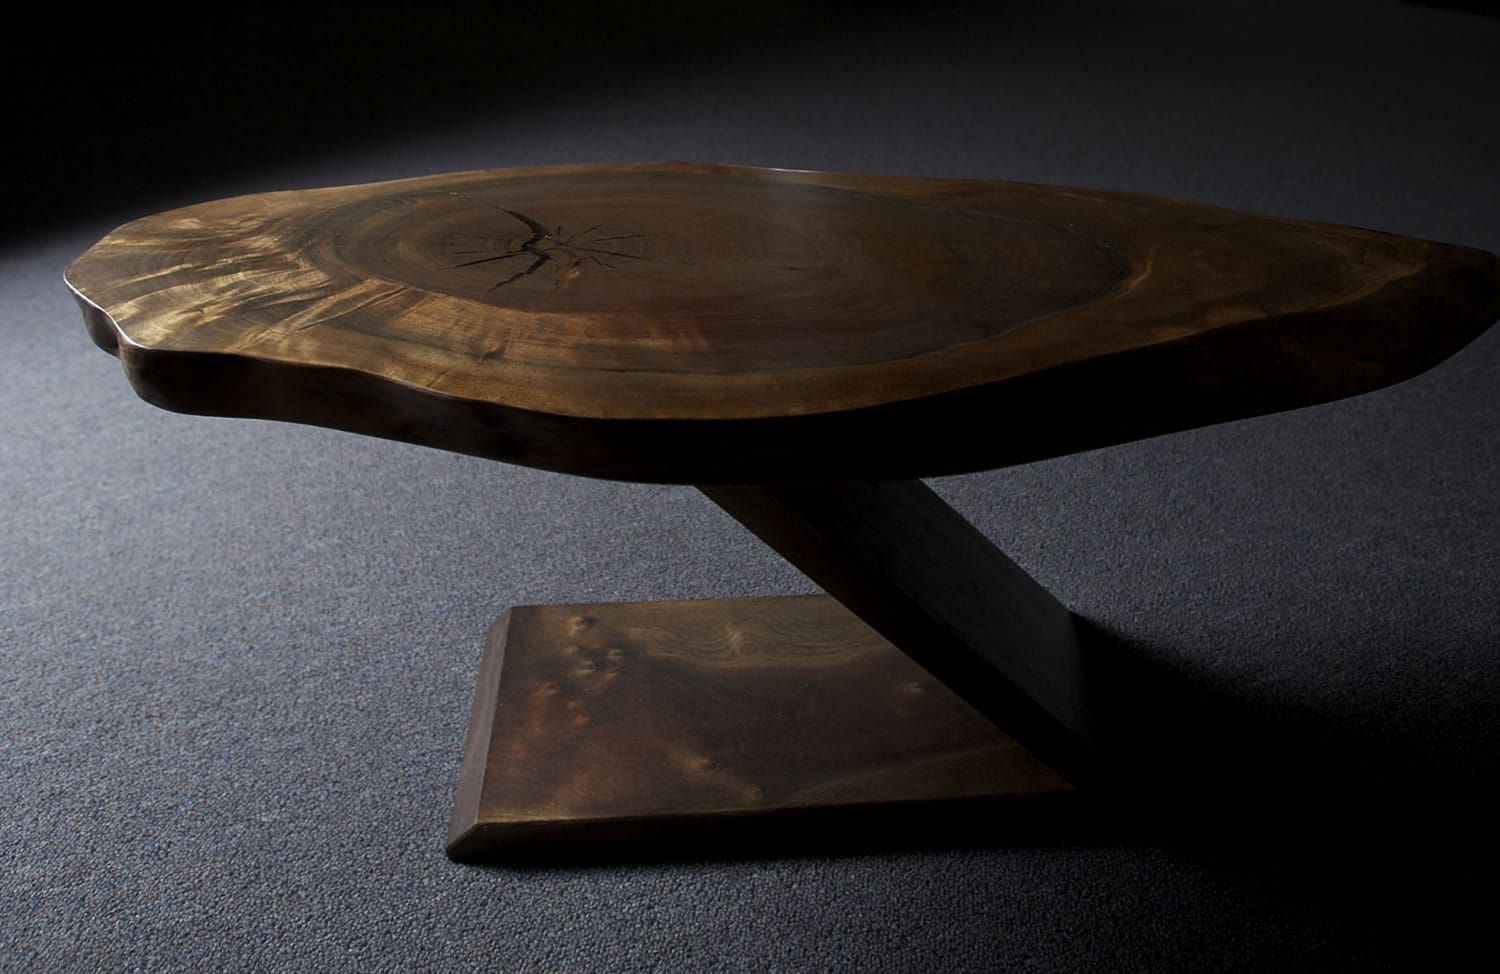 A coffee table made by Heart of Wood.